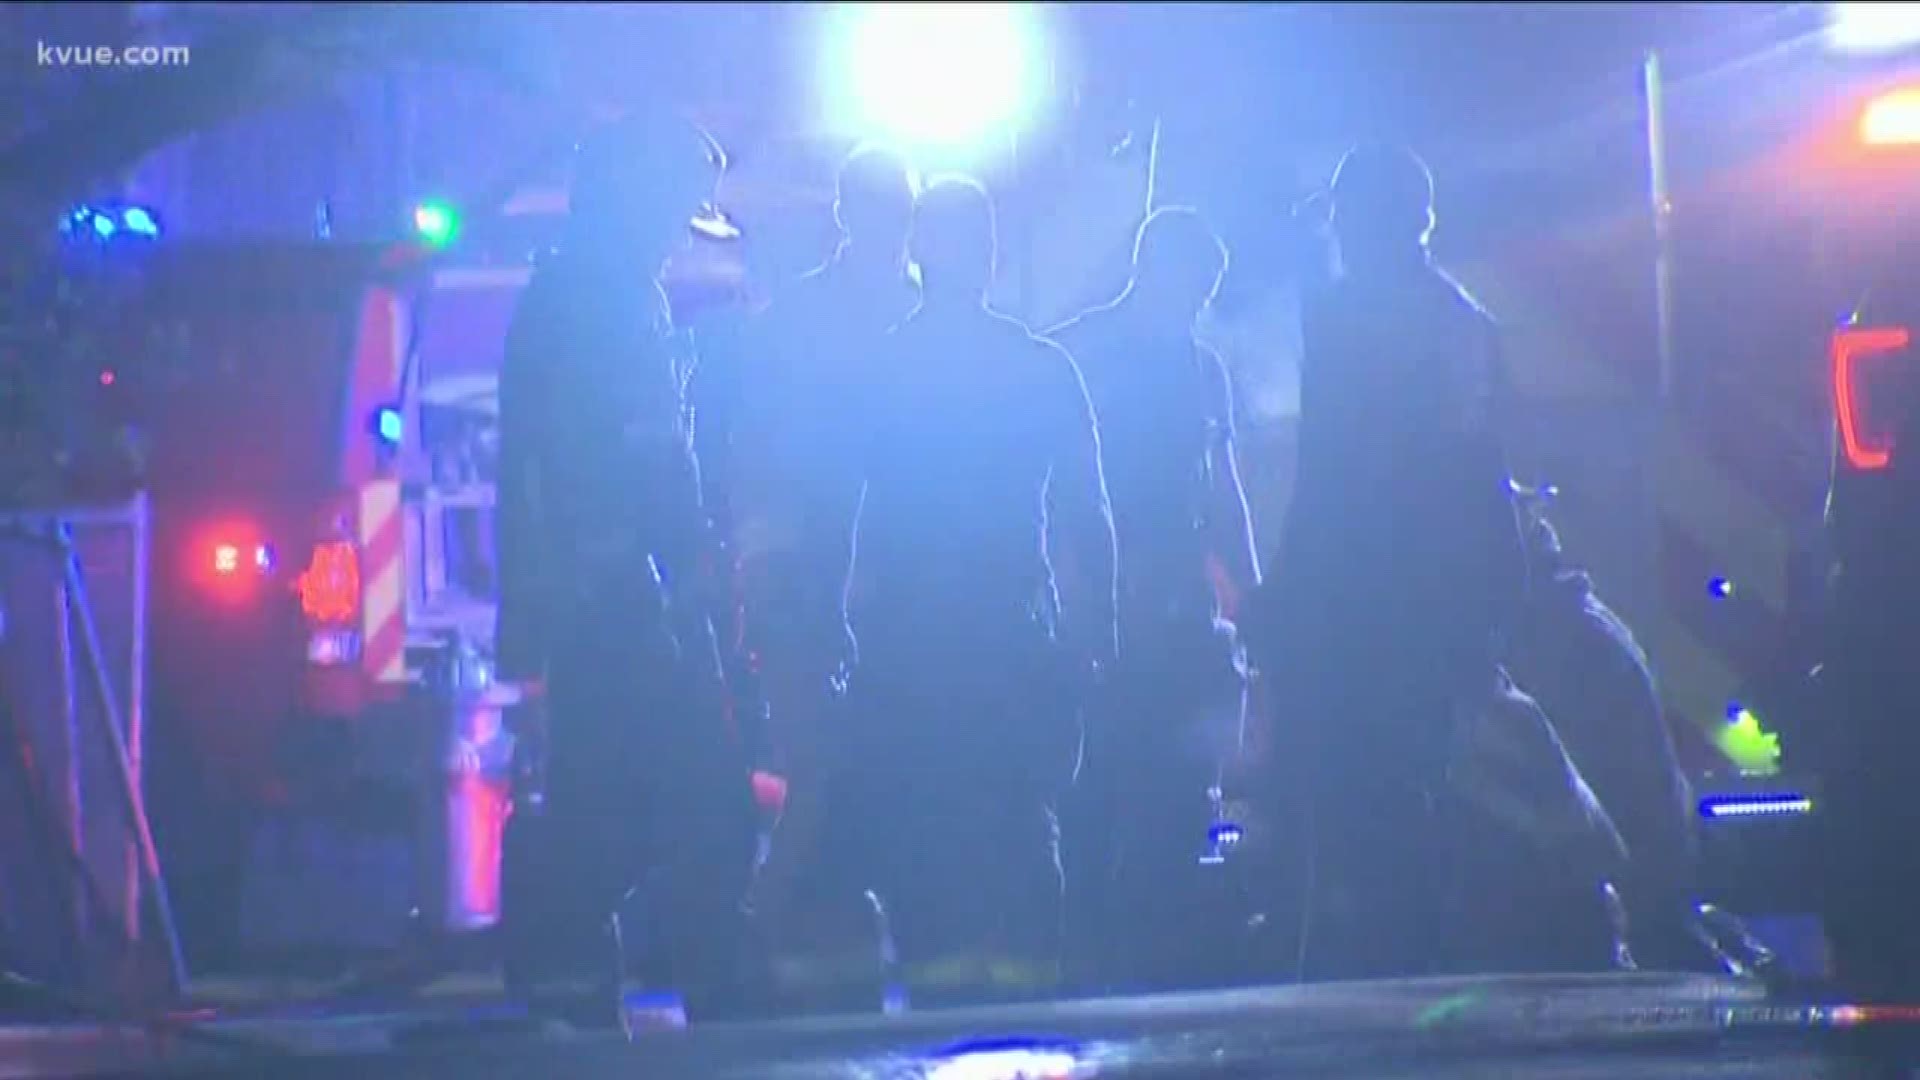 The fire happened just before 3:30 a.m. on East Stassney Lane near I-35 in southeast Austin.